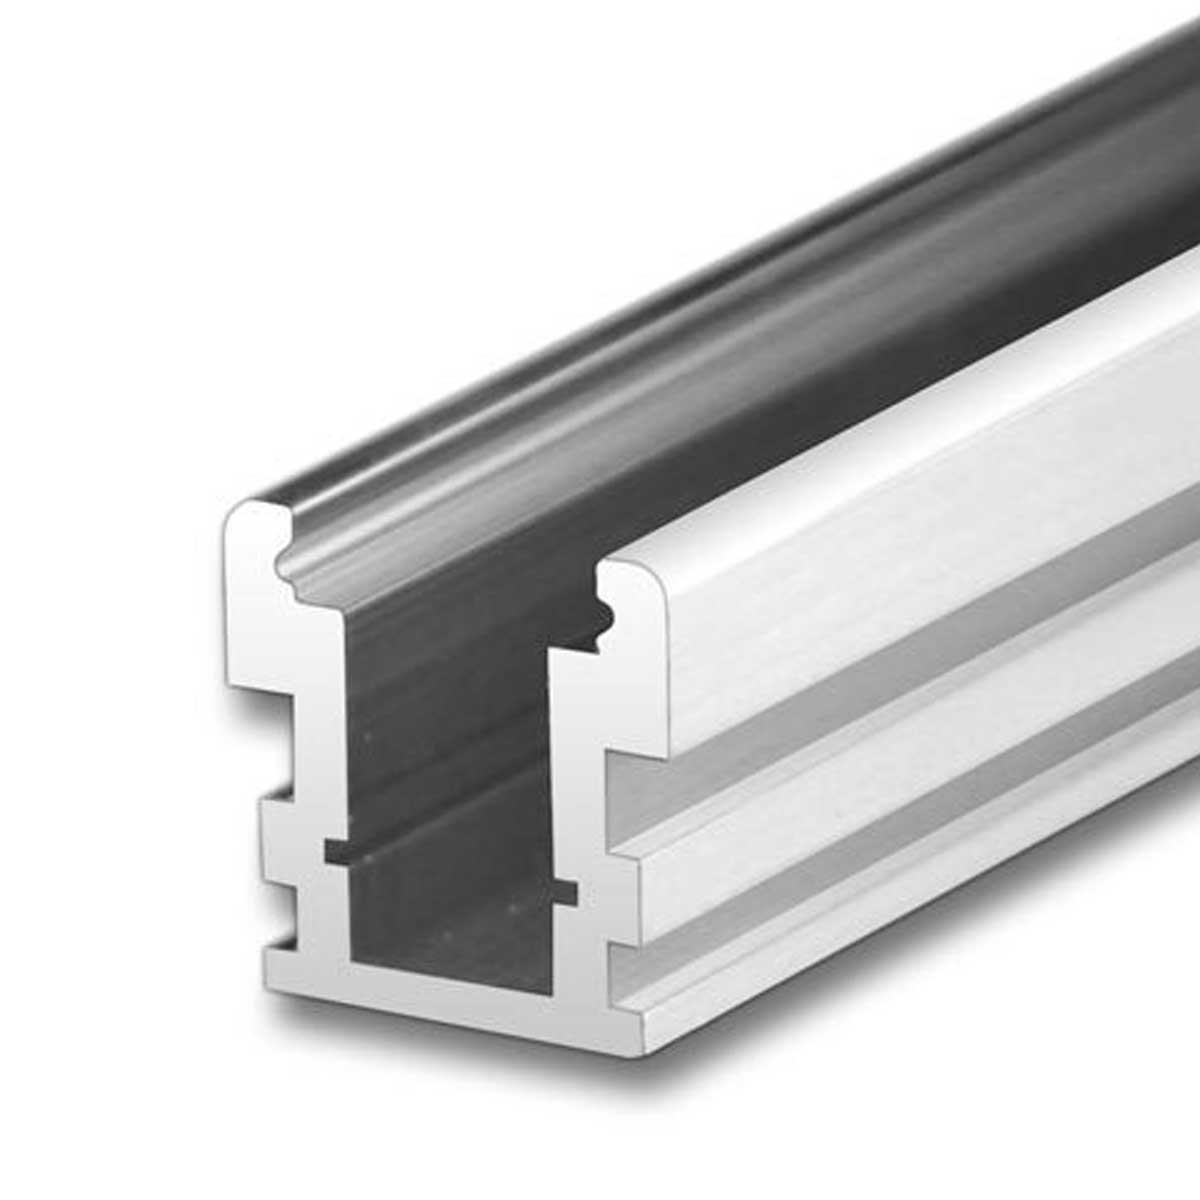 1000 Aluminium Slotted Channel Manufacturers, Suppliers in Kasganj